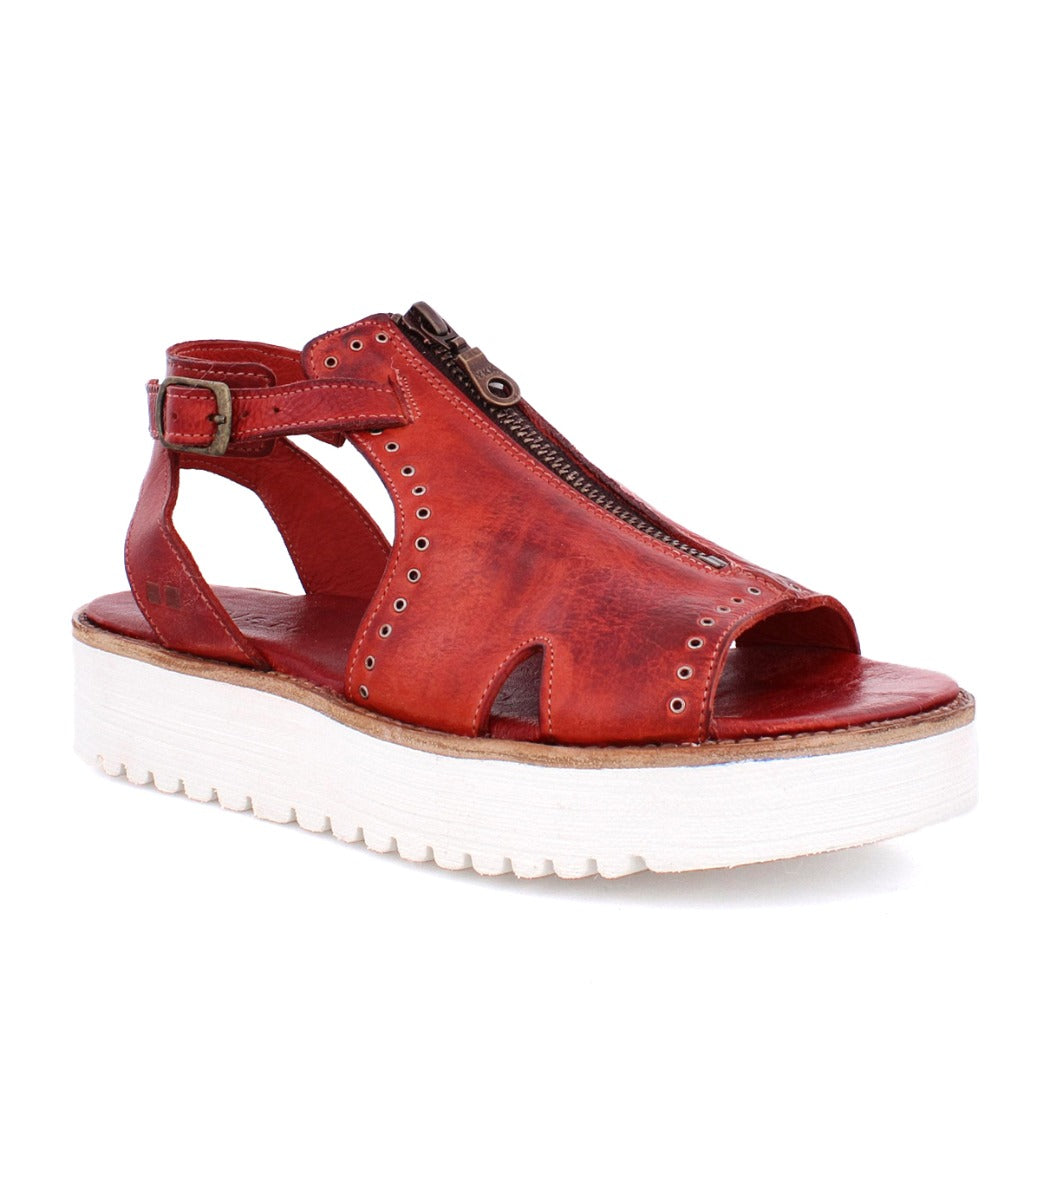 A Clancy sandal by Bed Stu, made of red pure leather with a white sole.